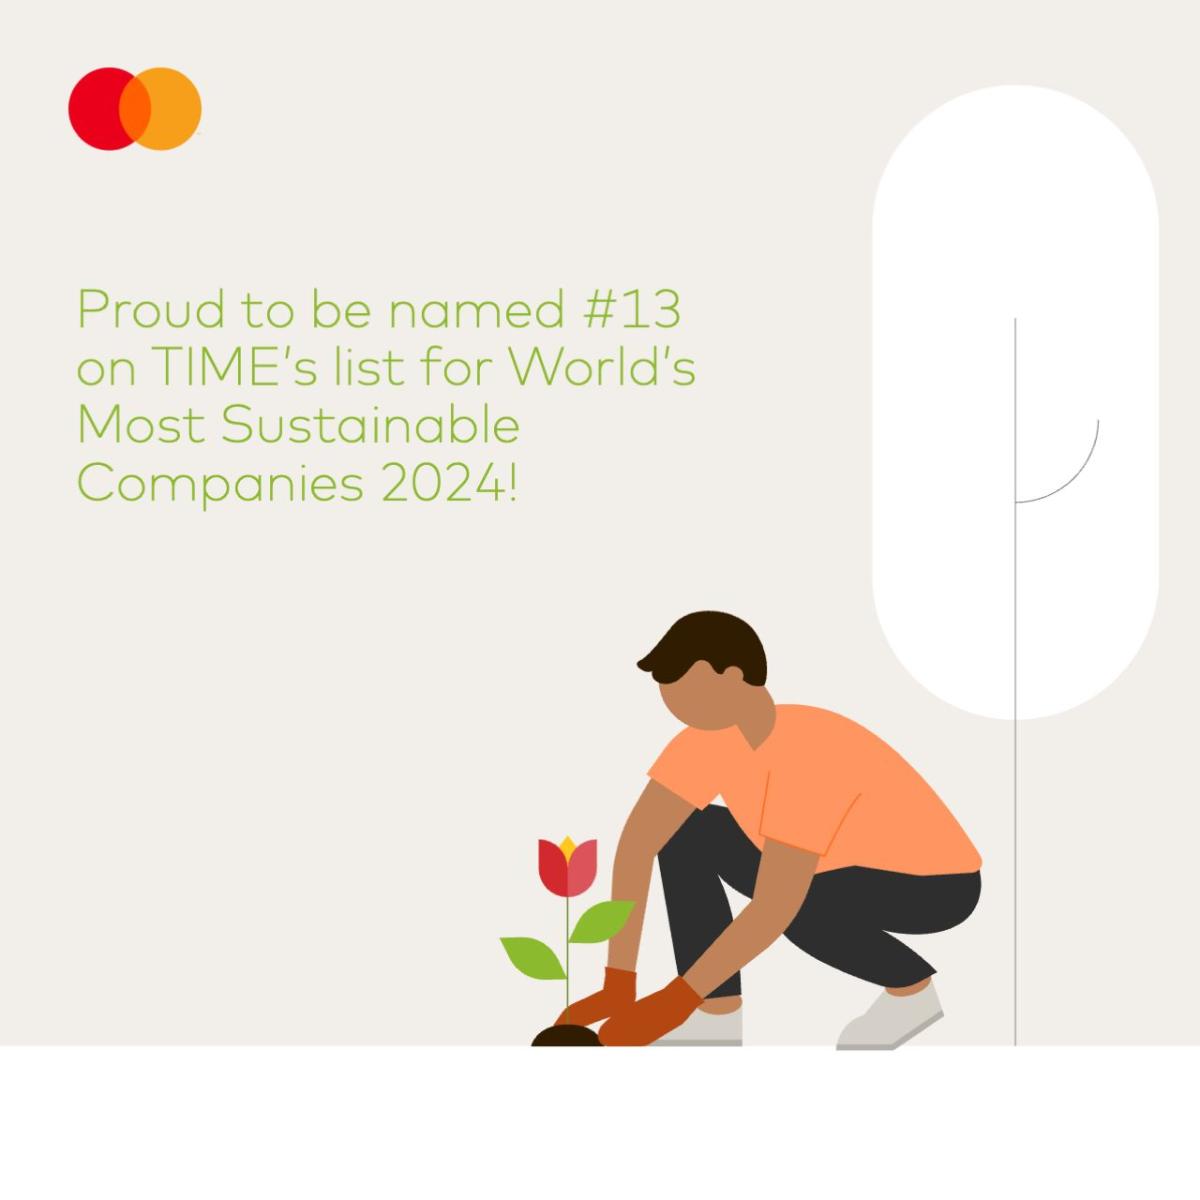 "Proud to be named #13 on TIME's list for World's Most Sustainable Companies 2024!"